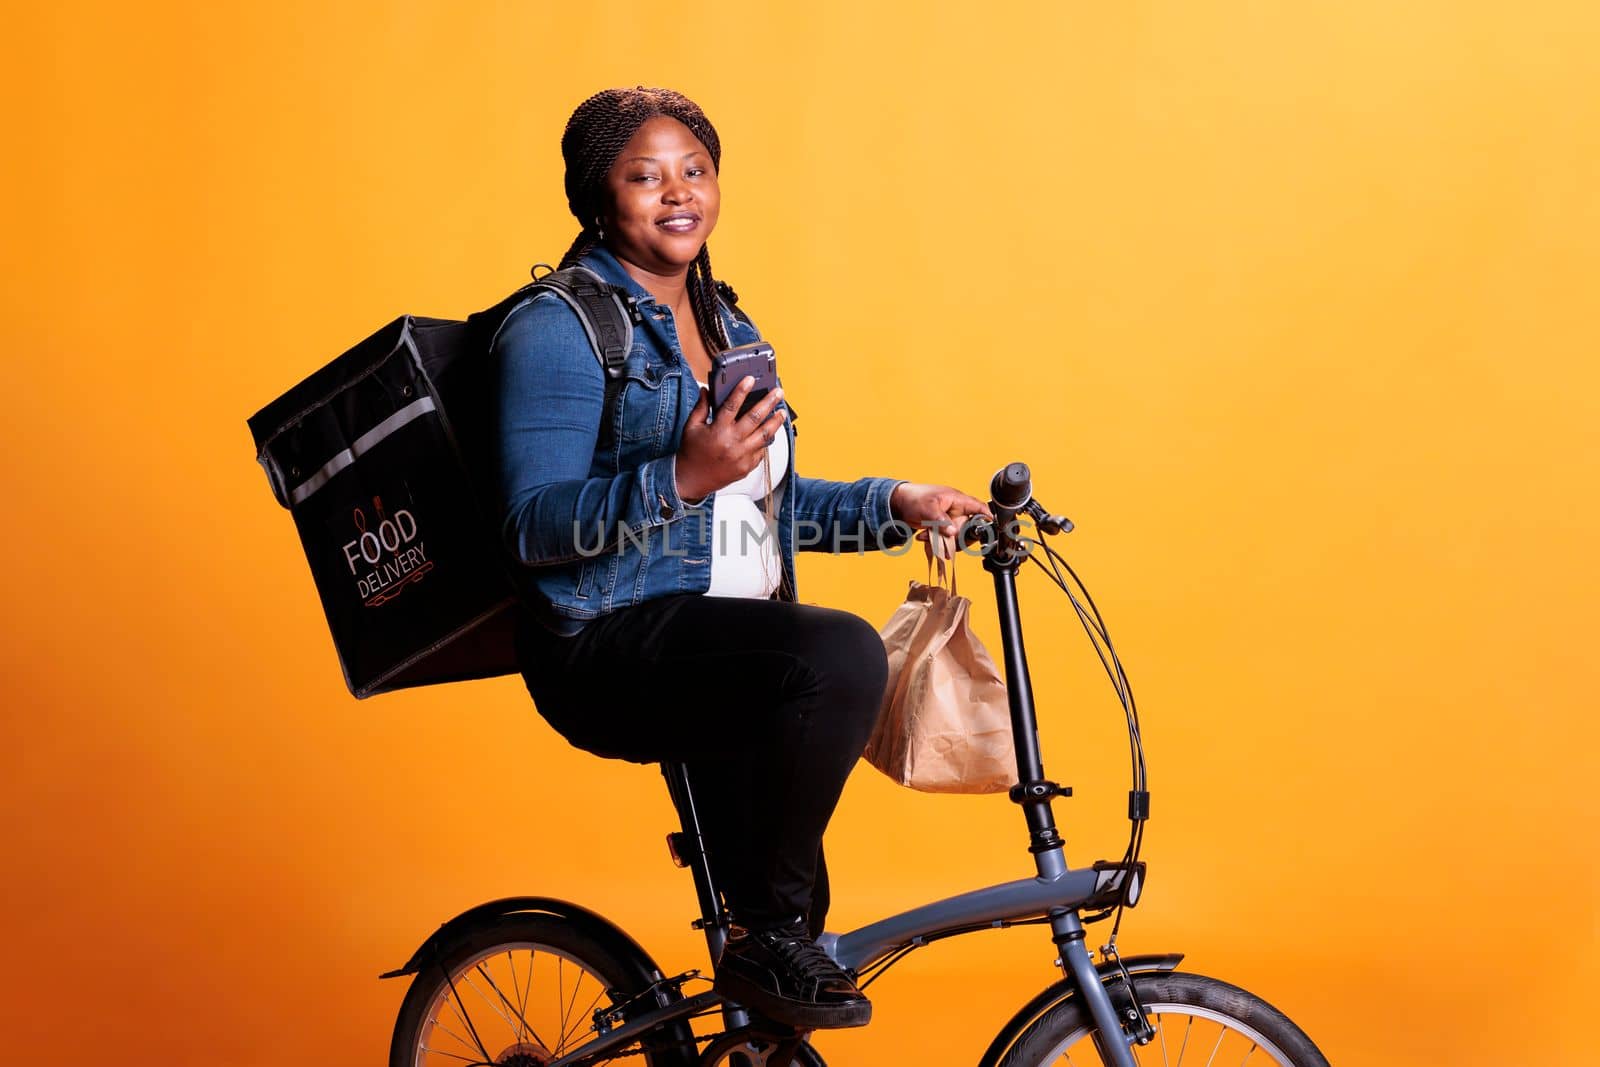 African american restaurant courier looking at client adreess on smartphone before start delivering fast food order to client. Pizzeria employee bringing takeaway meal using bike as transportation